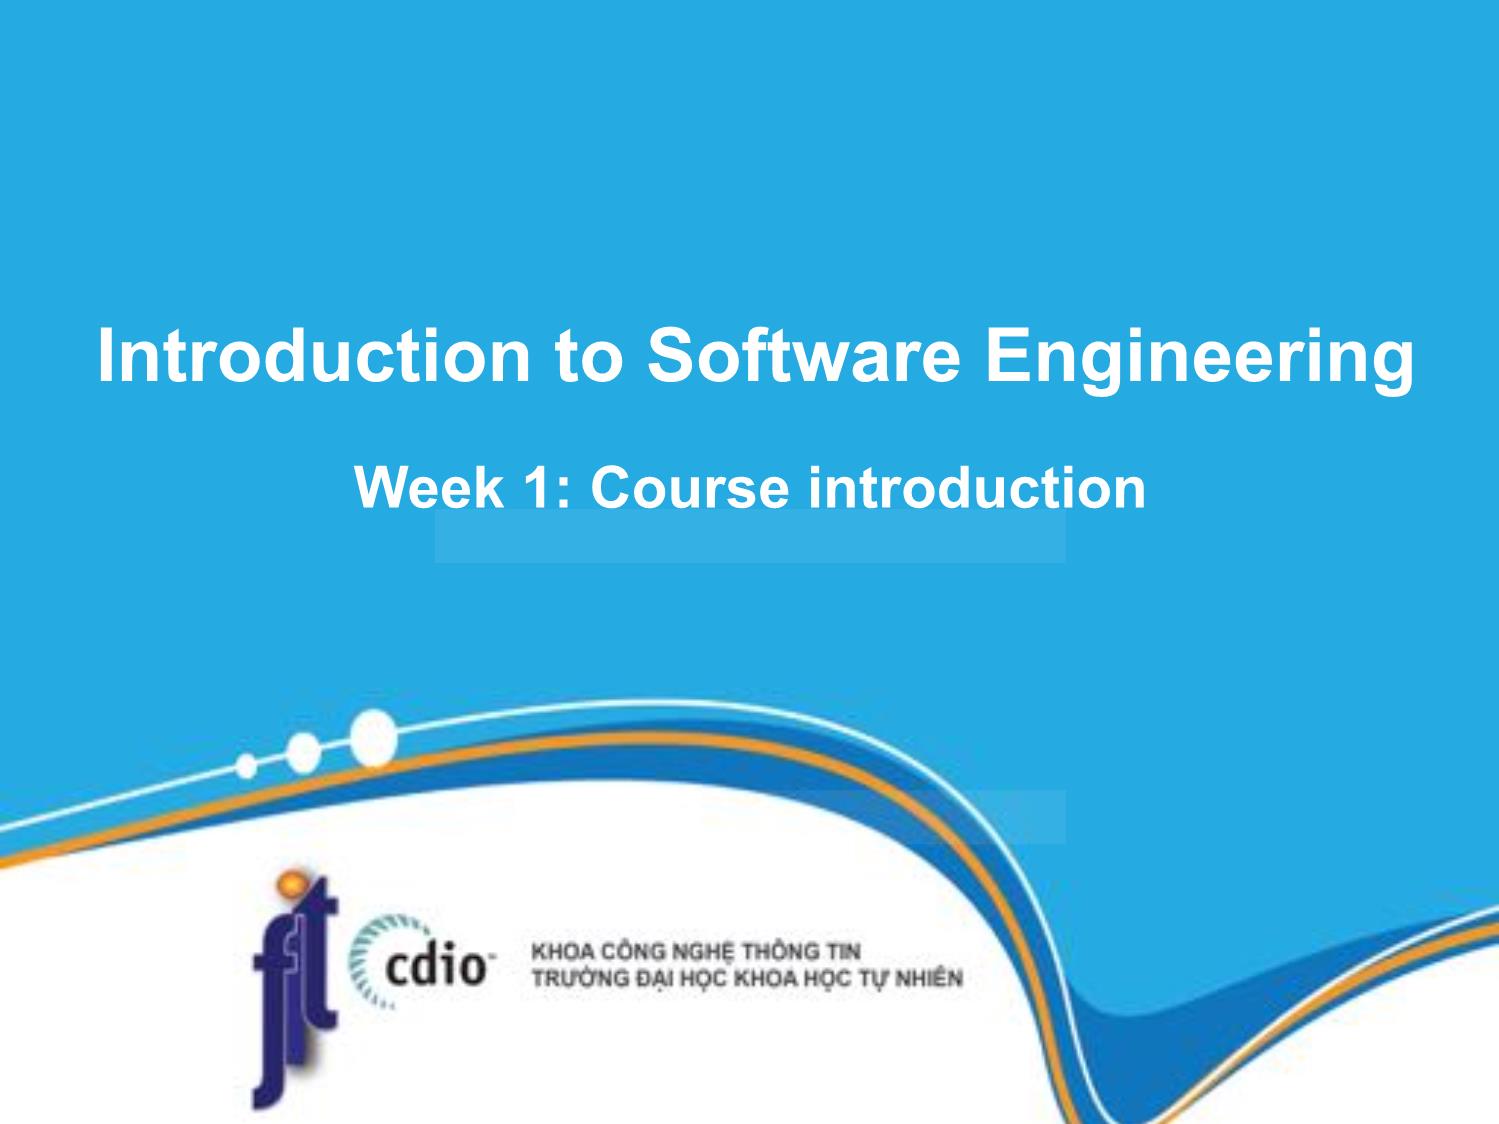 Bài giảng Introduction to Software Engineering - Week 1: Course introduction - Nguyễn Thị Minh Tuyền trang 1